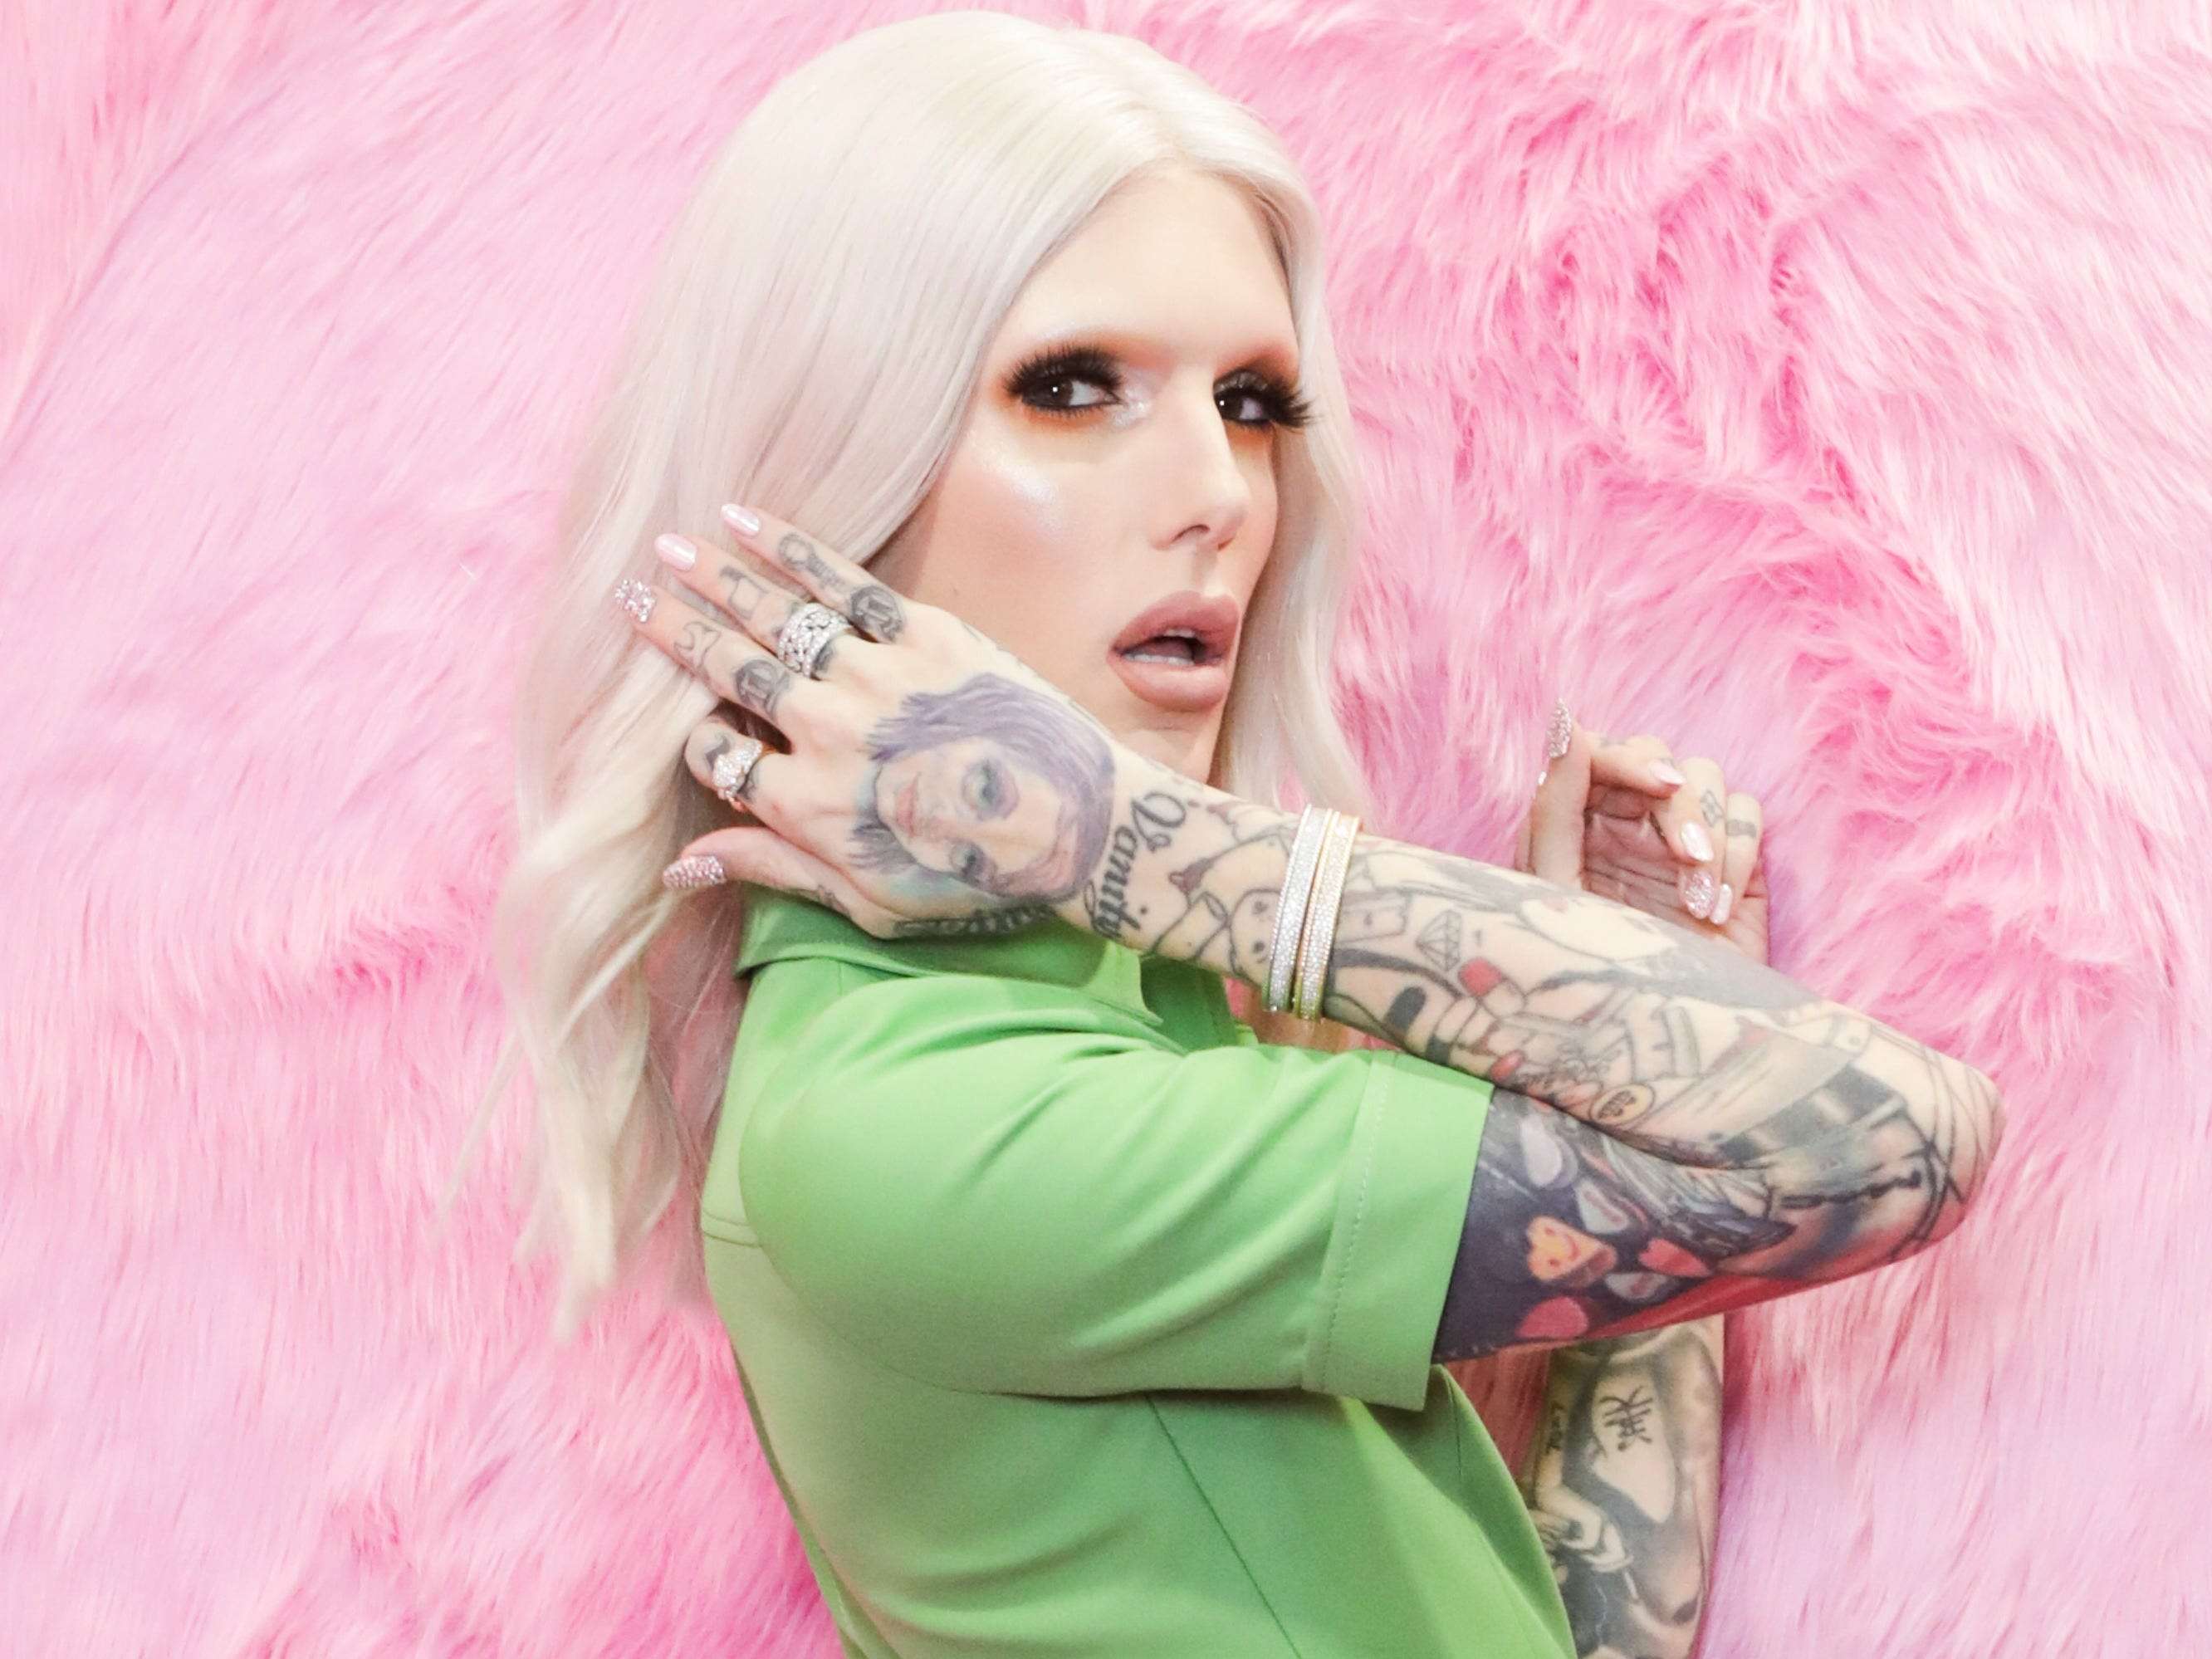 2. "Morphe Discount Codes for Jeffree Star Products" - wide 11